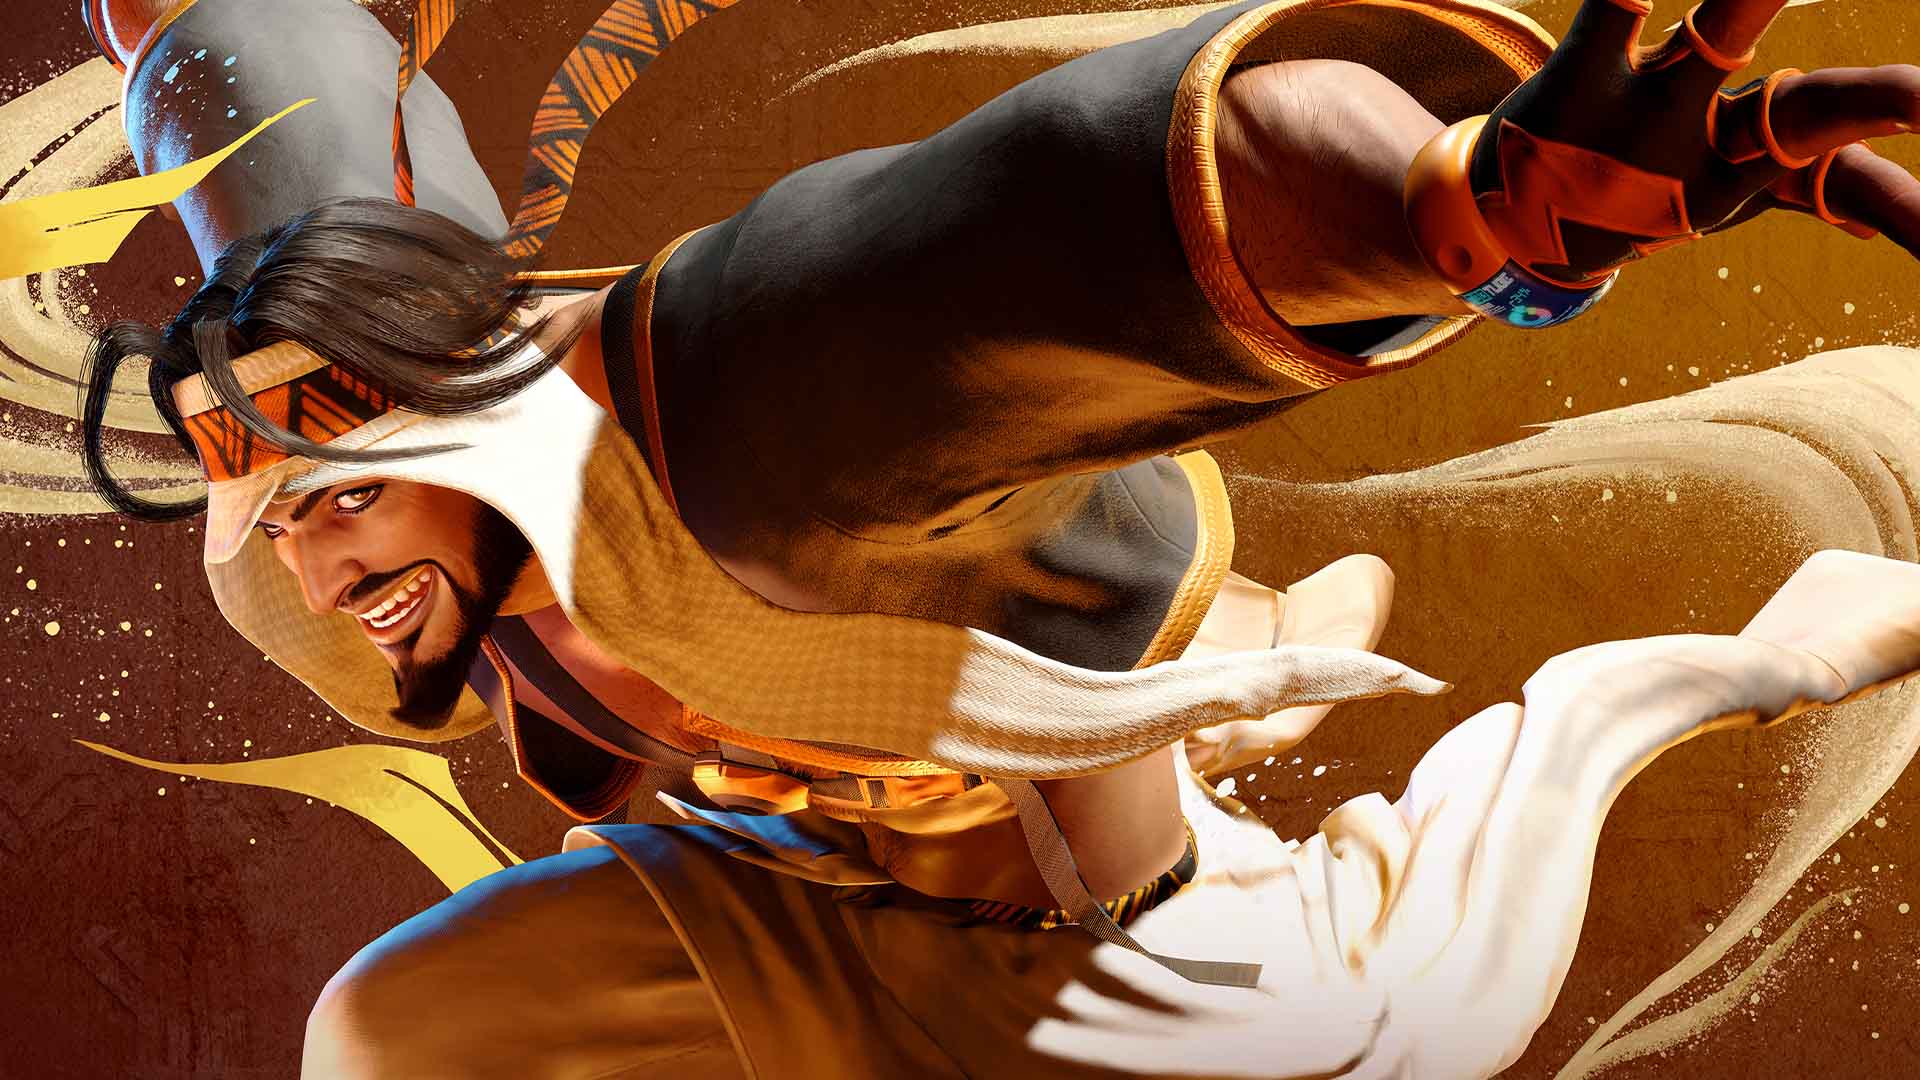 Capcom has released a trailer for the first DLC for Street Fighter 6, which adds a new character to the game - Rashid